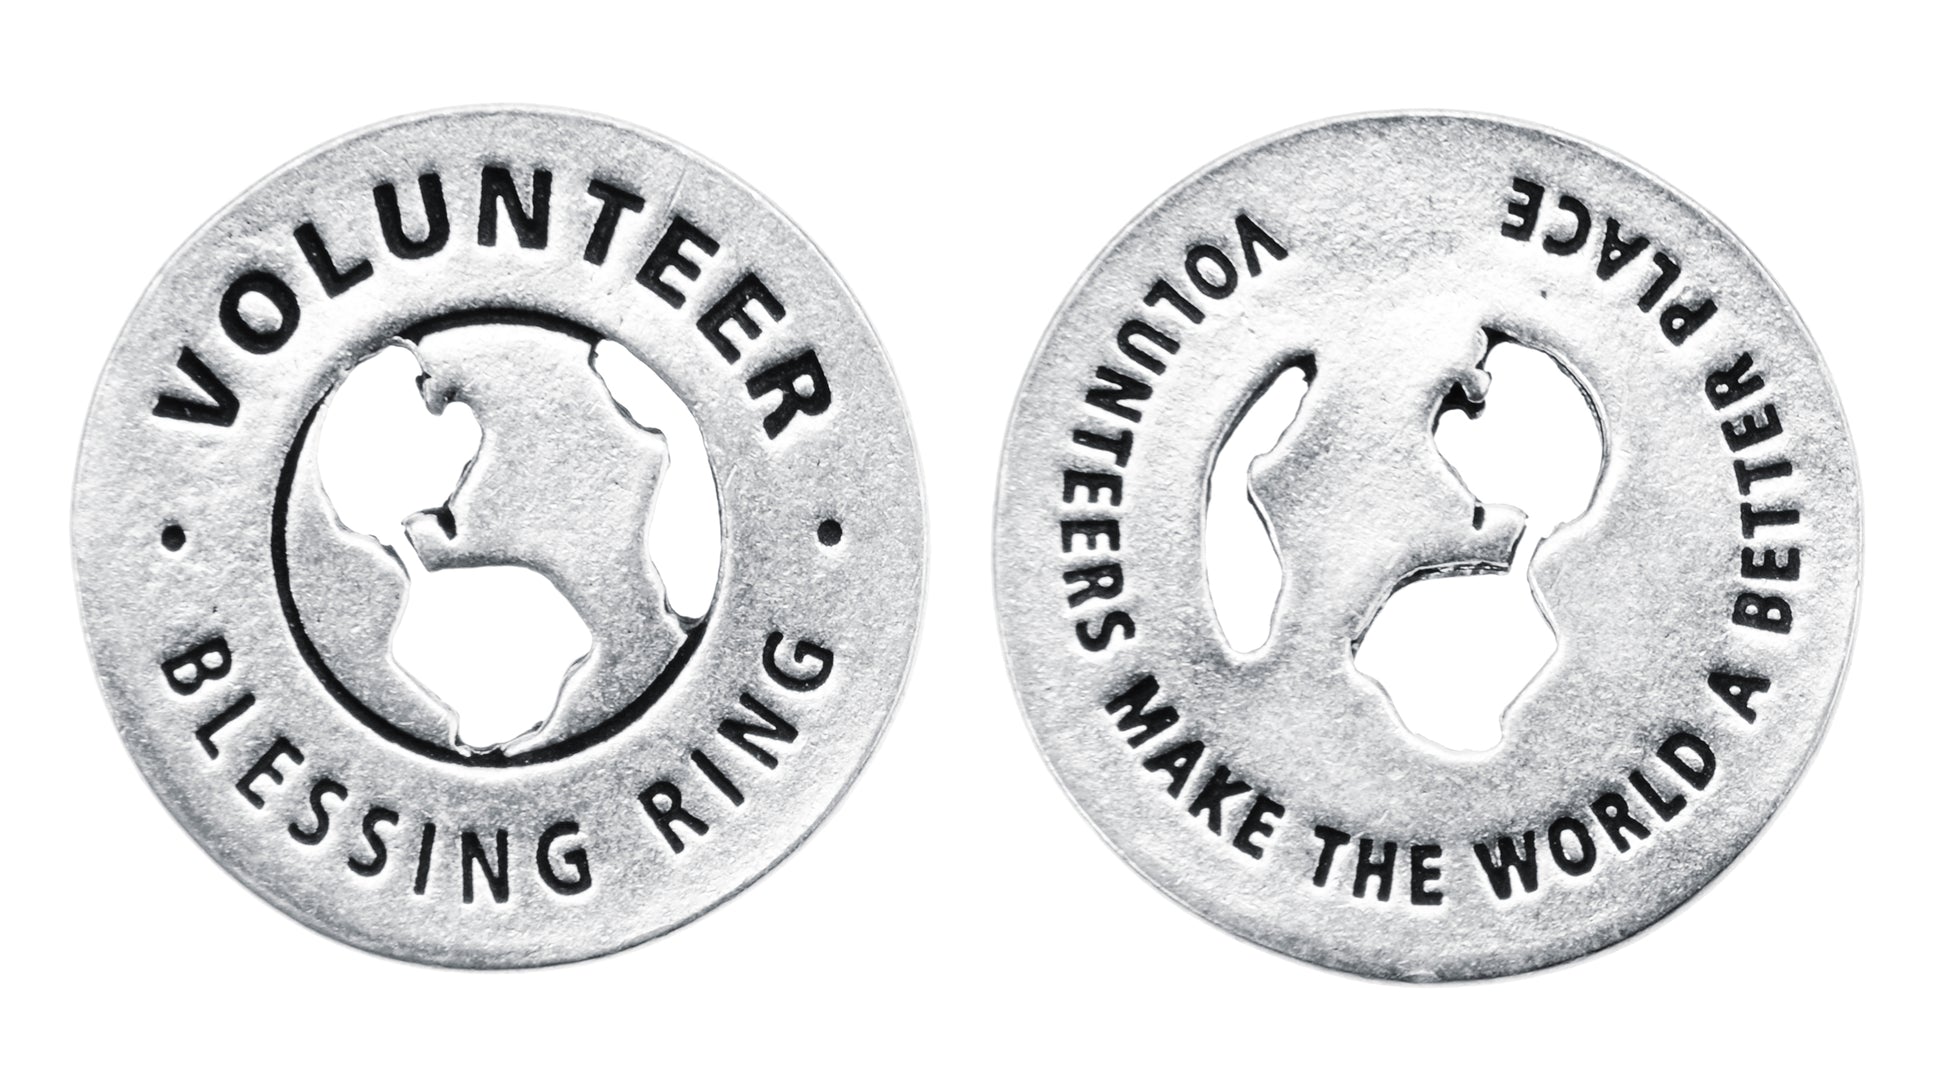 Volunteer Blessing Ring front and back